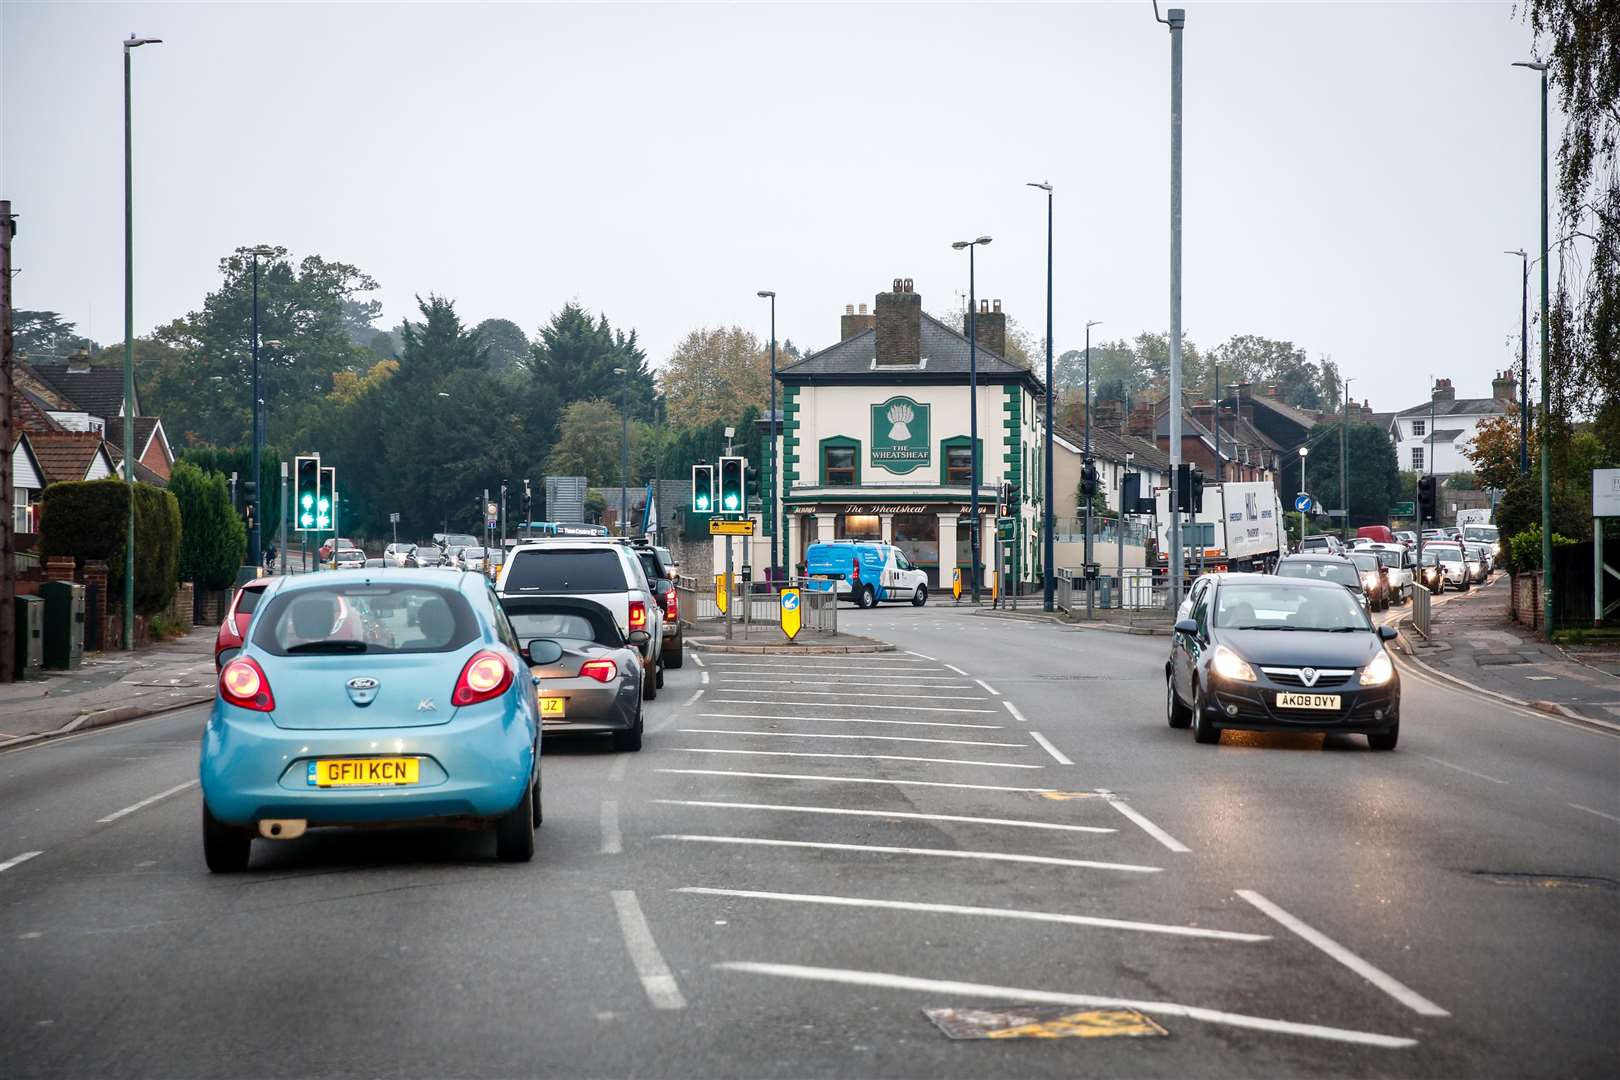 The Loose Road junction with the A274 Sutton Road